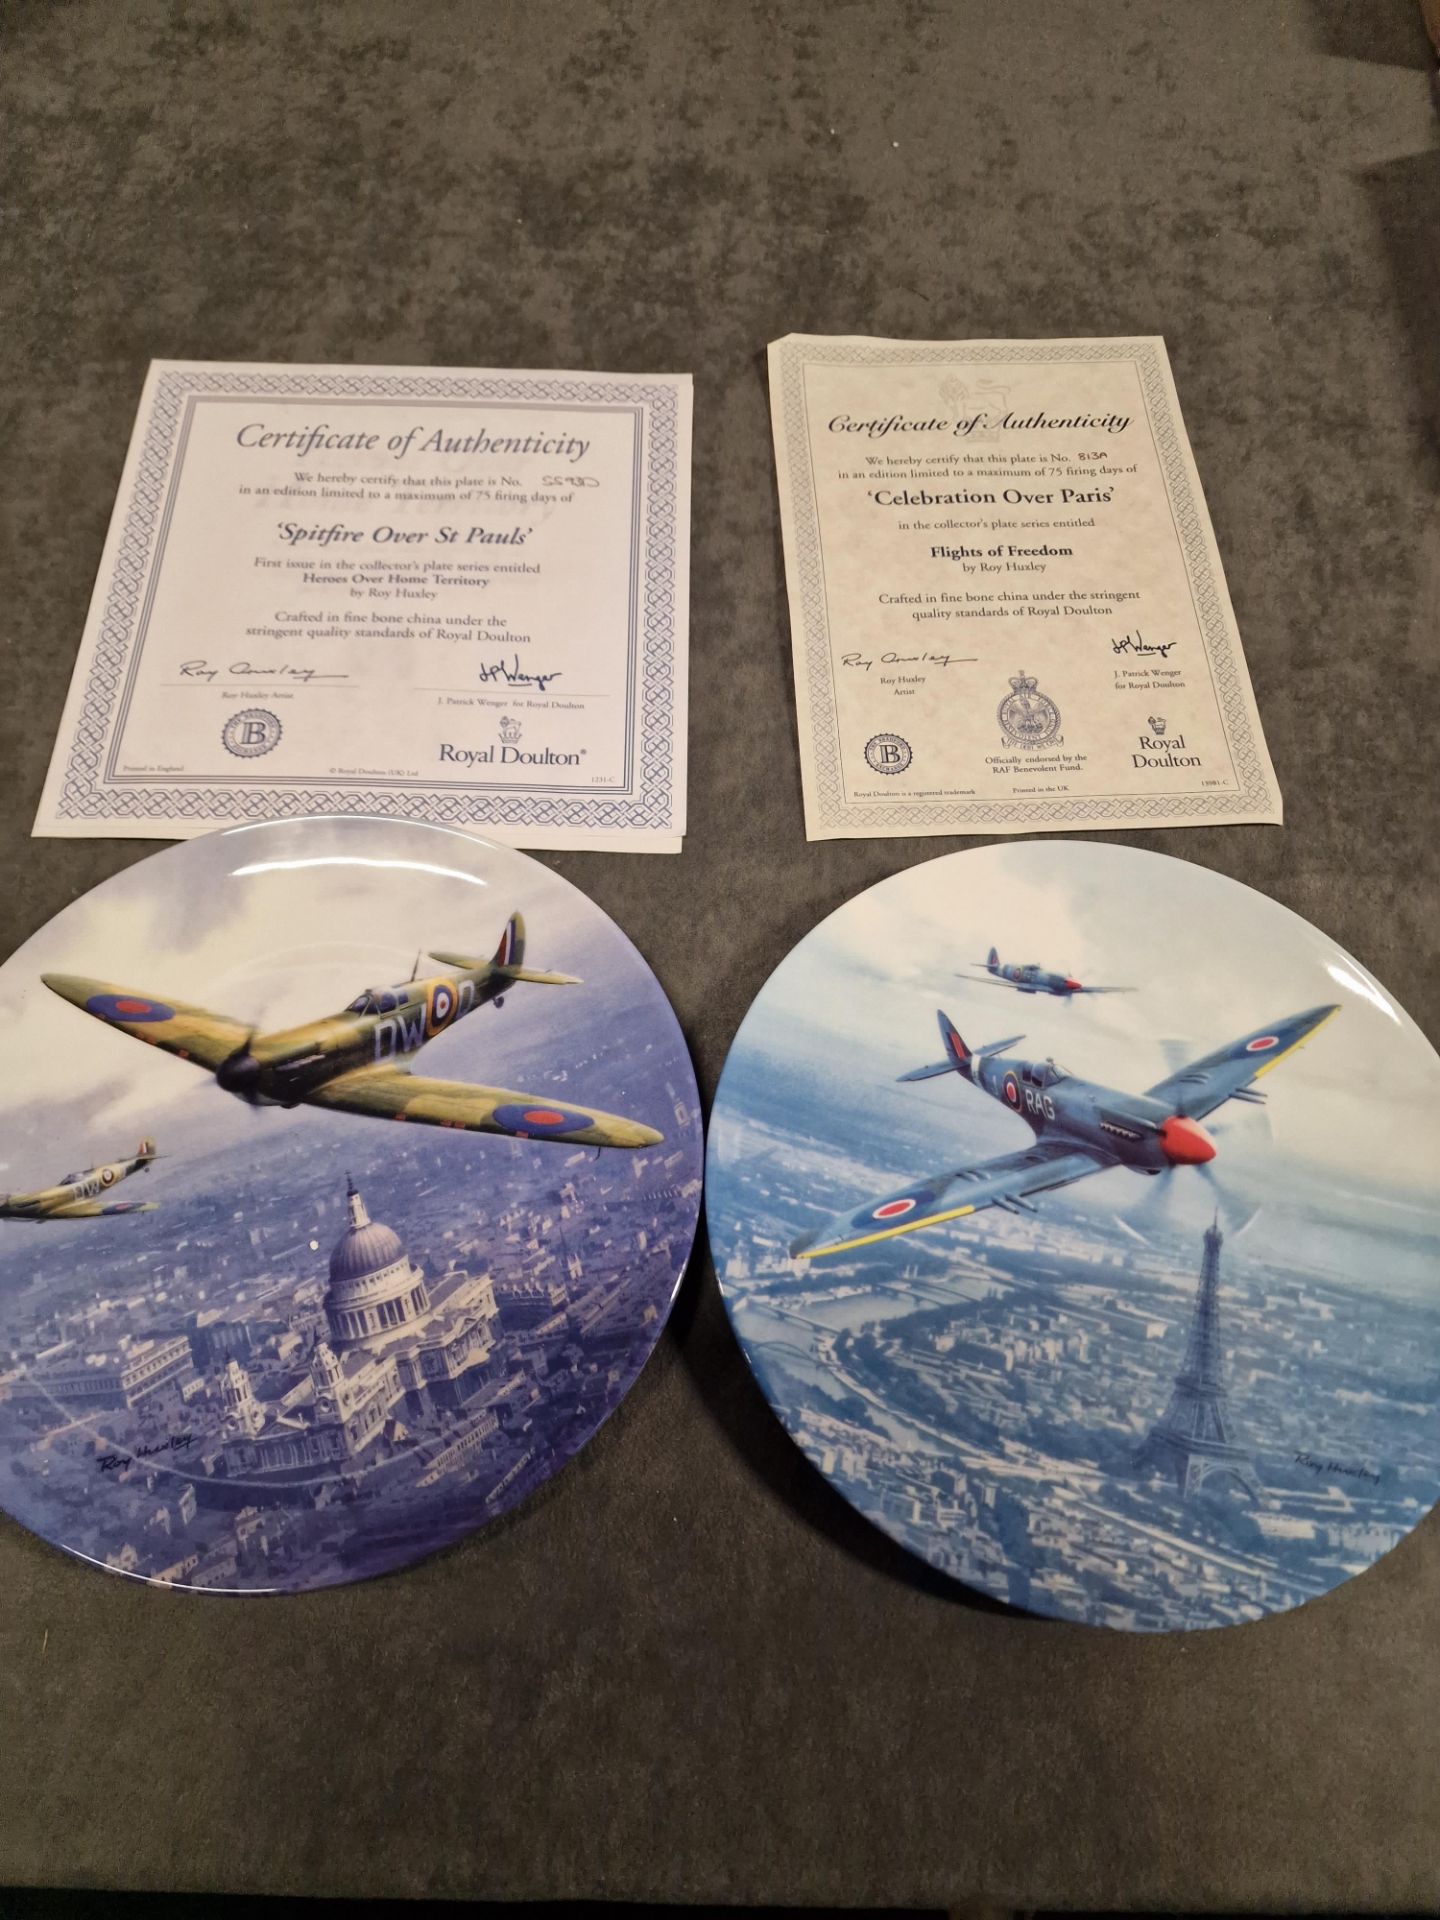 2x Roy Huxley Limited Edition Fine Porcelain Commemorative Wall Plates For Royal Daulton (1) Over